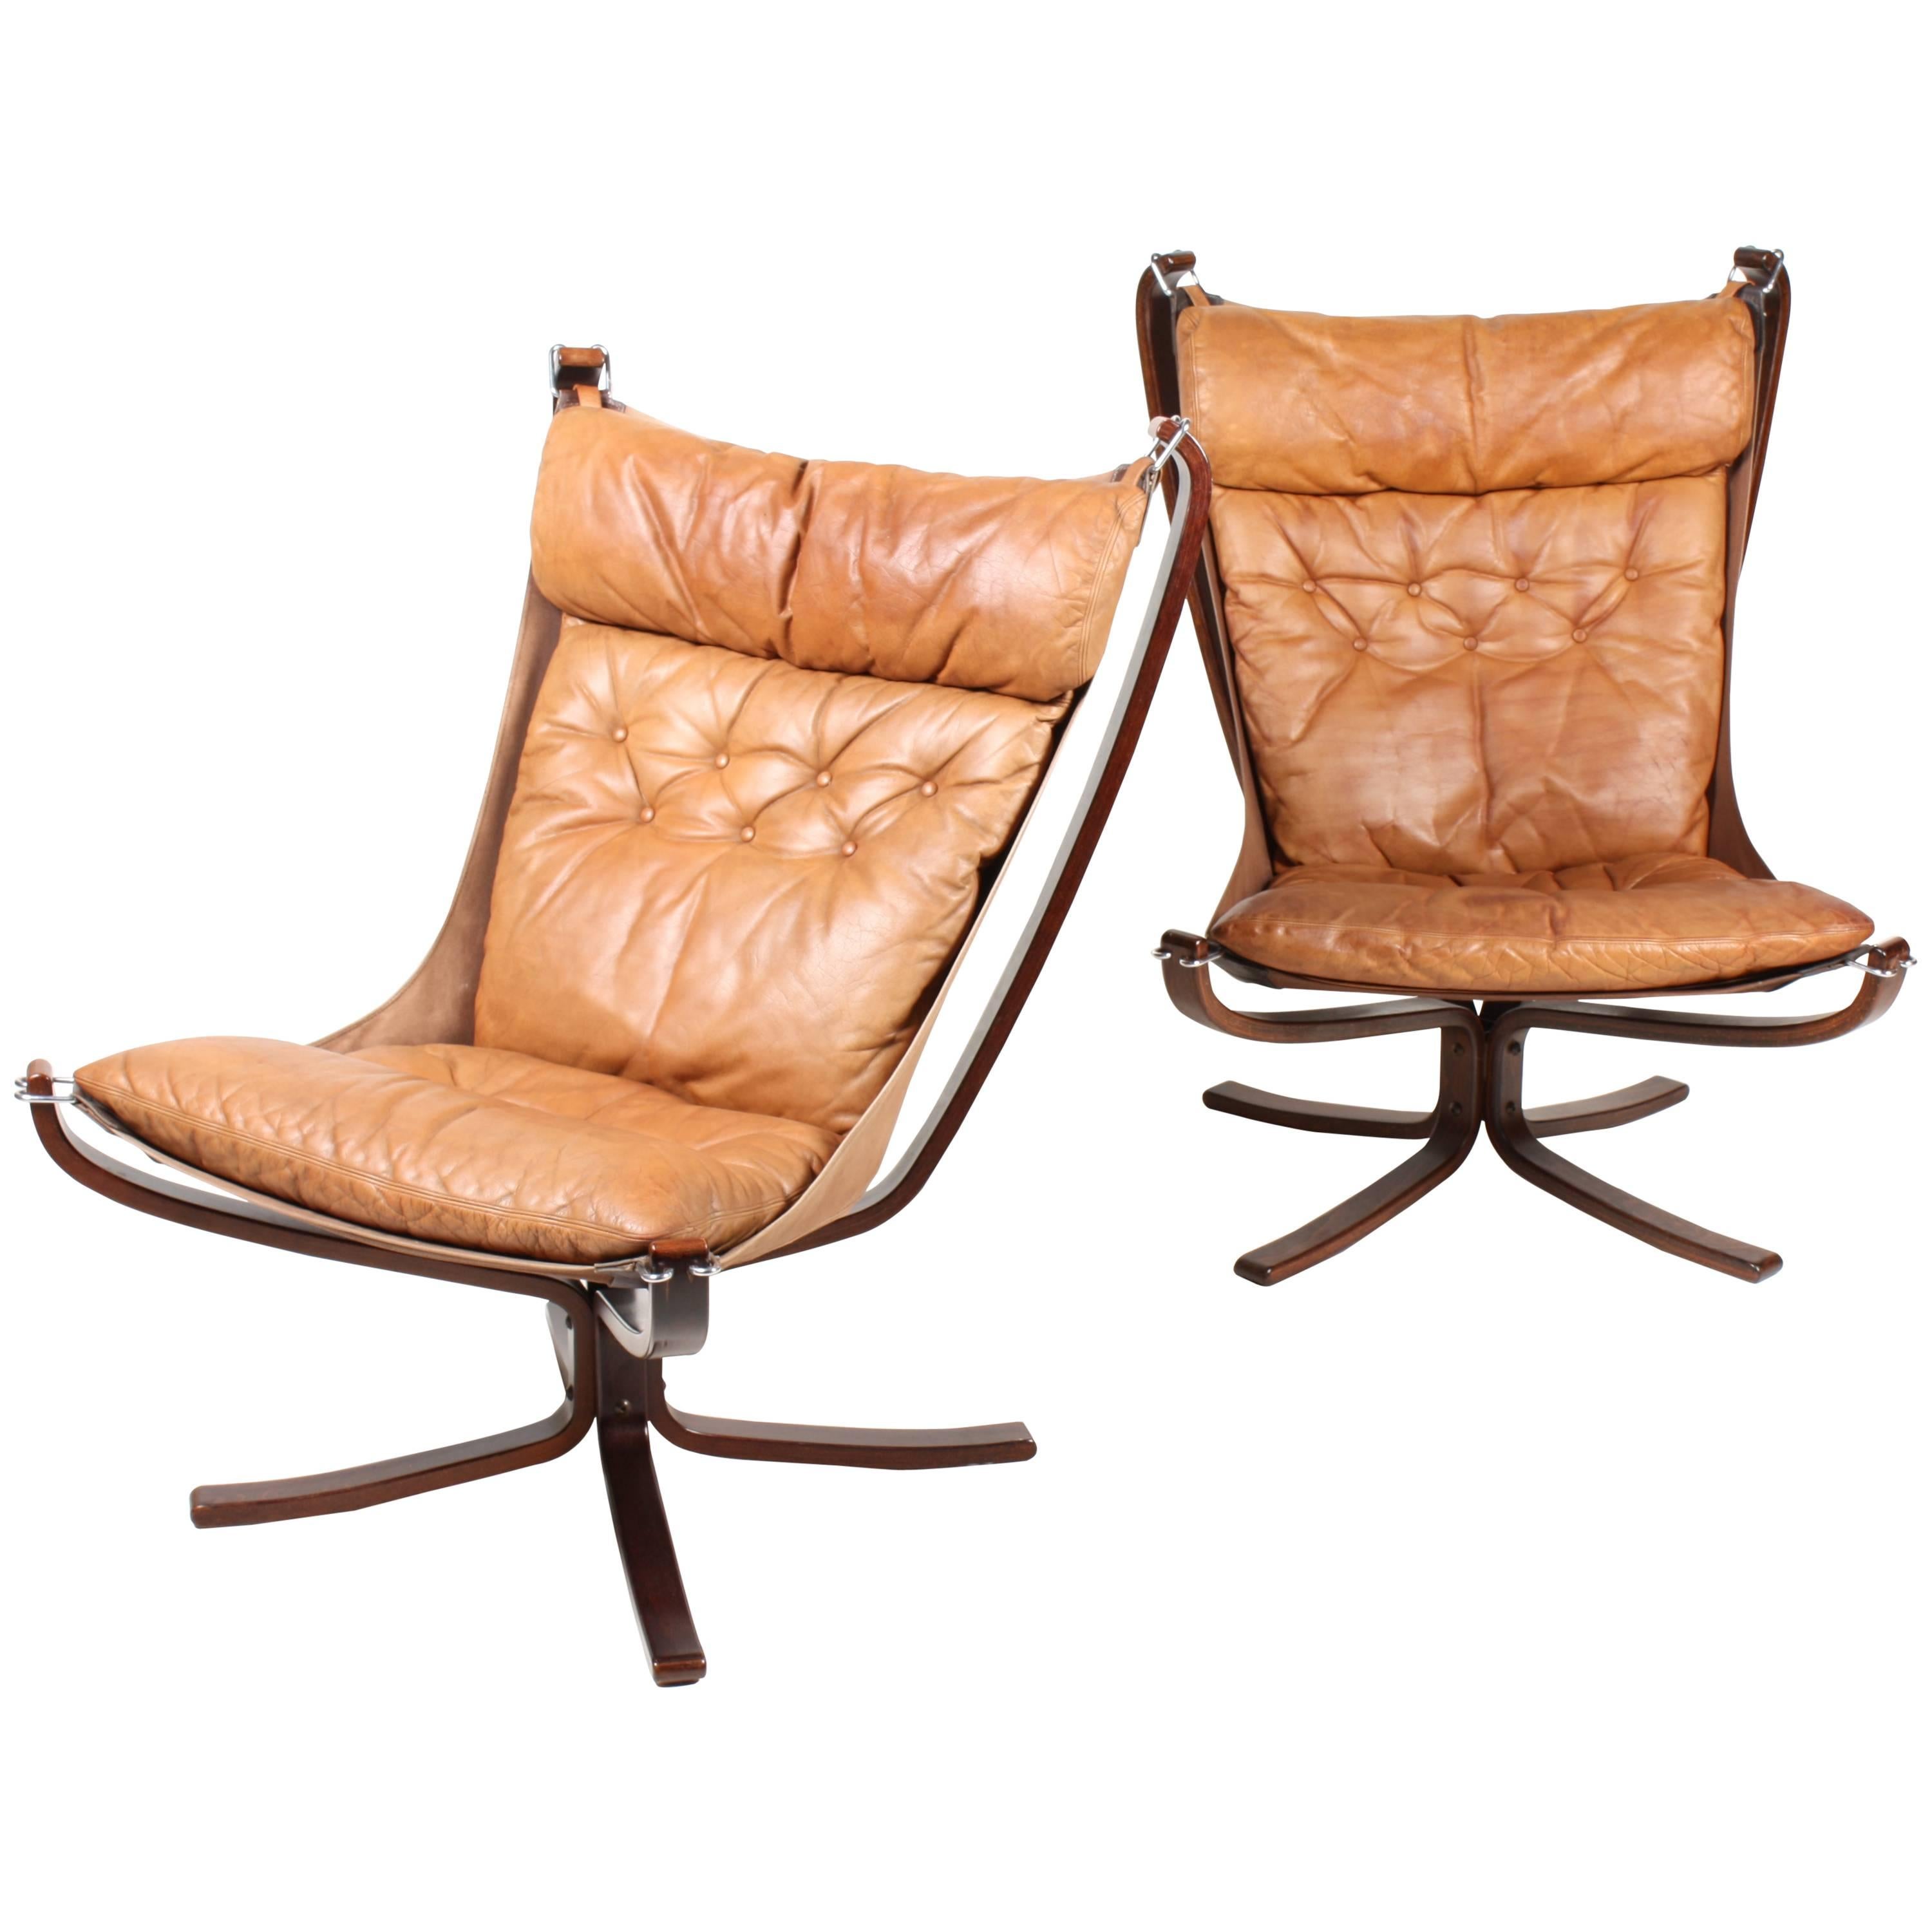 Pair of Falcon Chairs in Patinated Leather